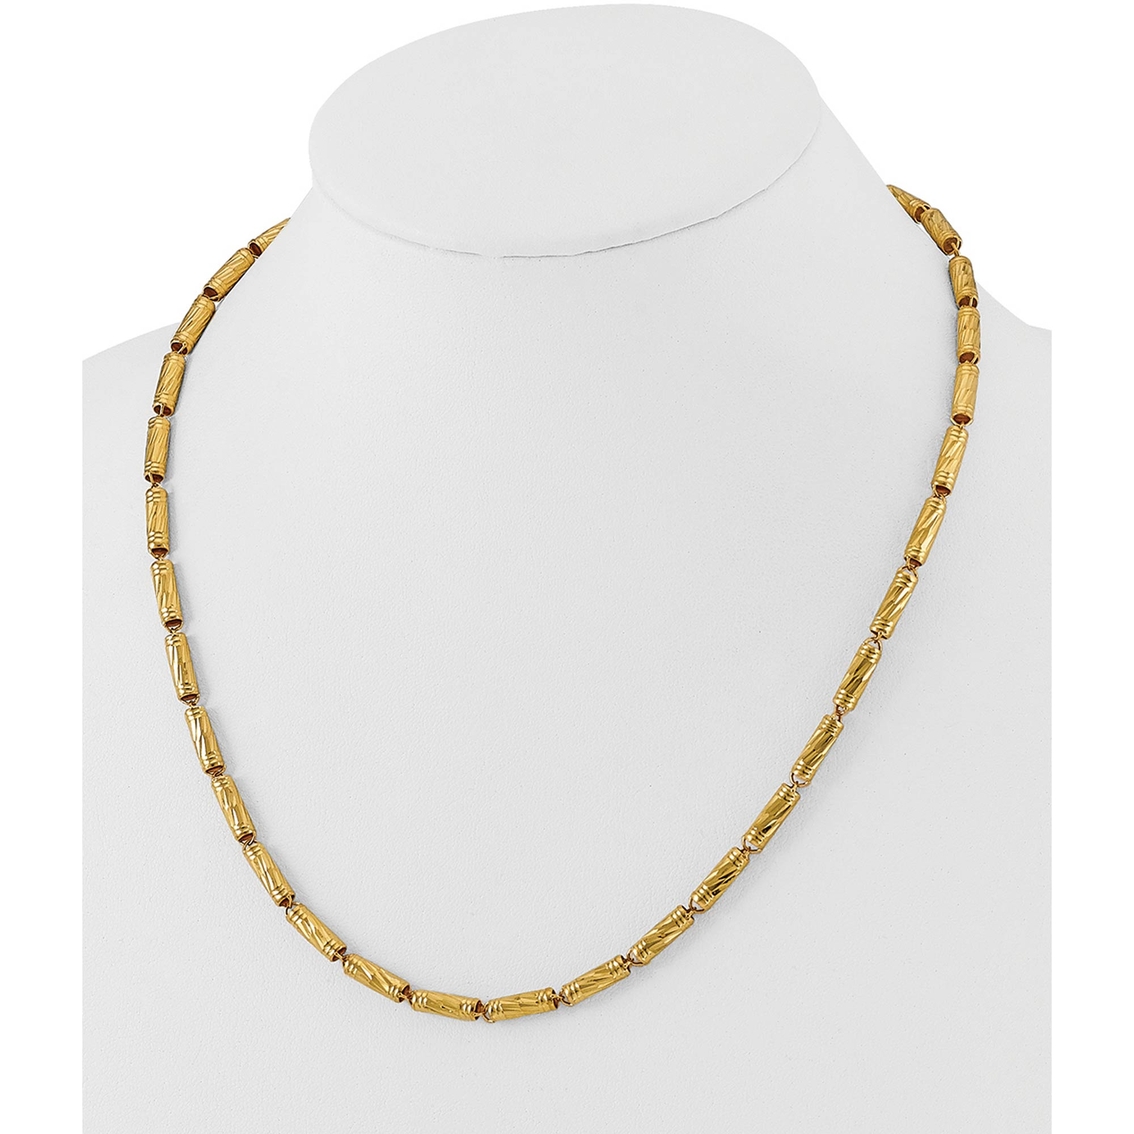 24K Pure Gold 18 in. Bamboo Link Chain Necklace - Image 6 of 6